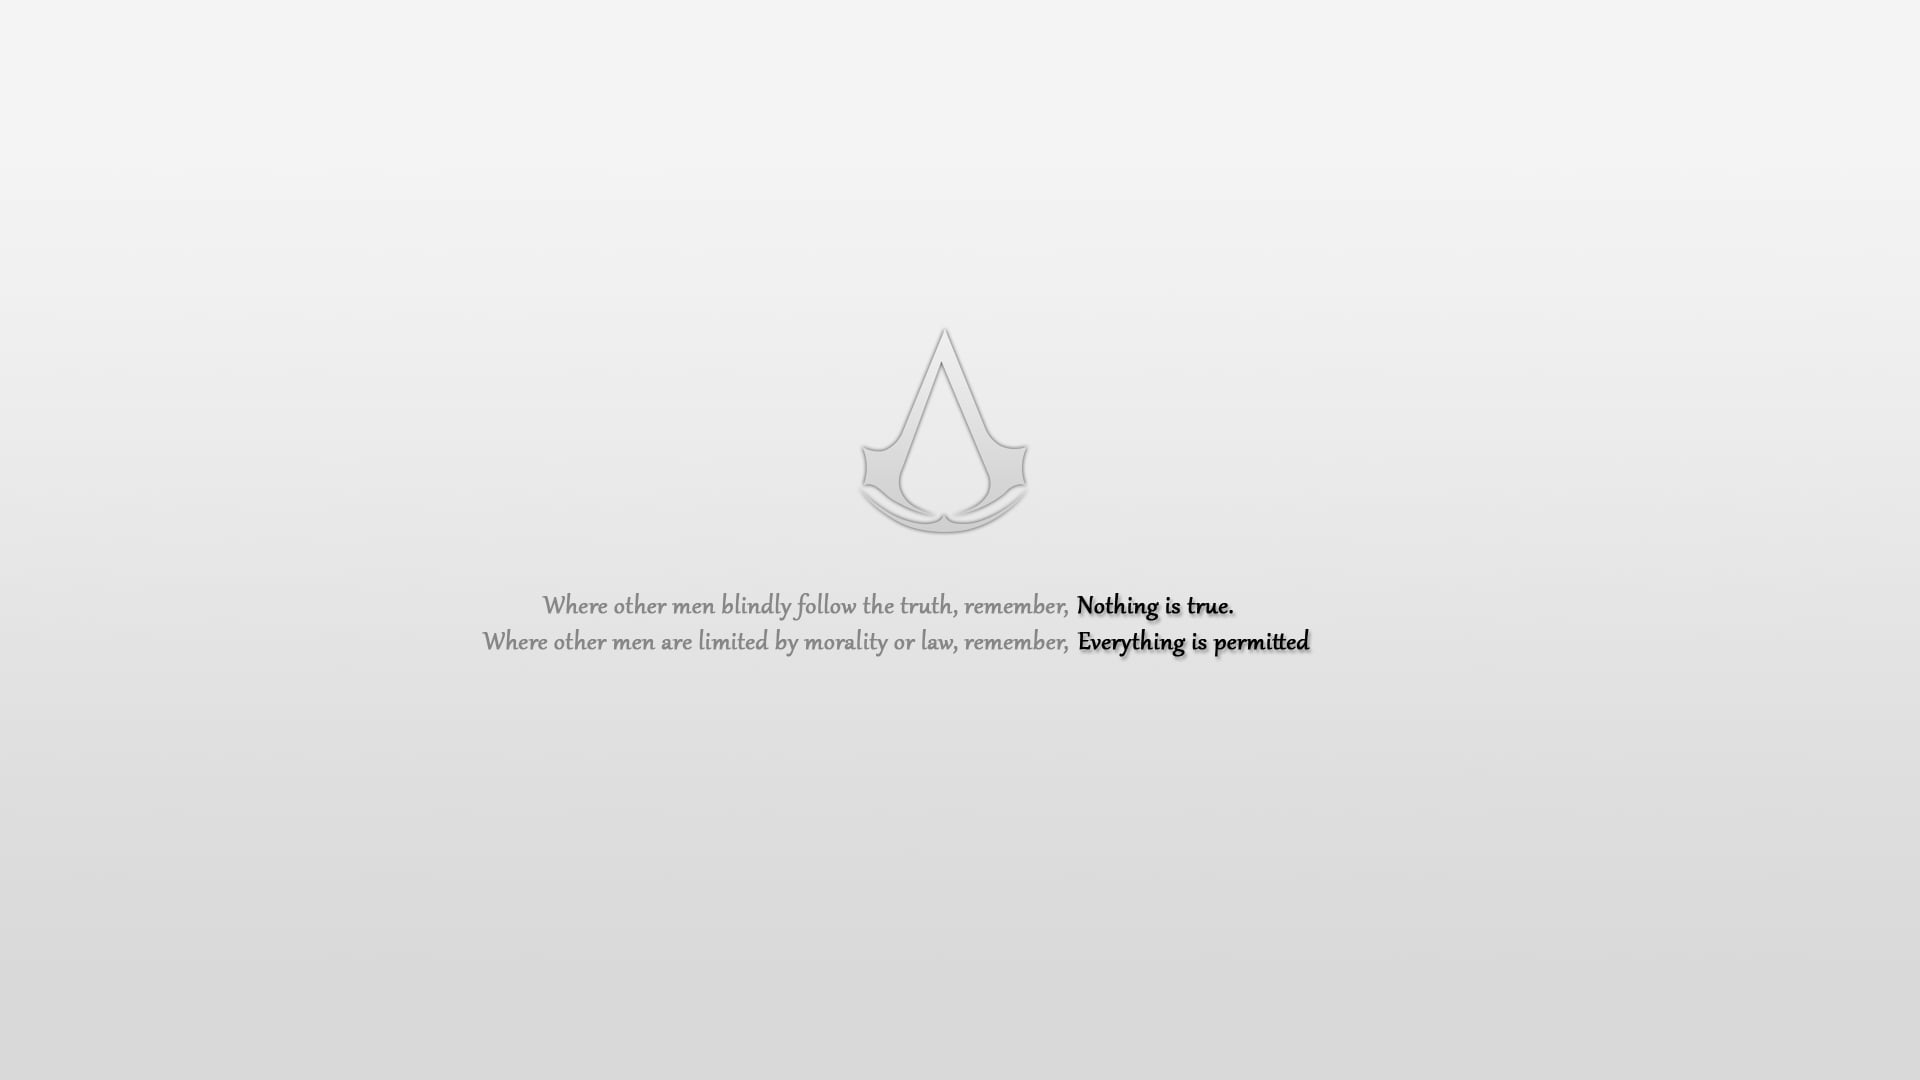 Assassin's Creed logo, video games, digital art, quote, text